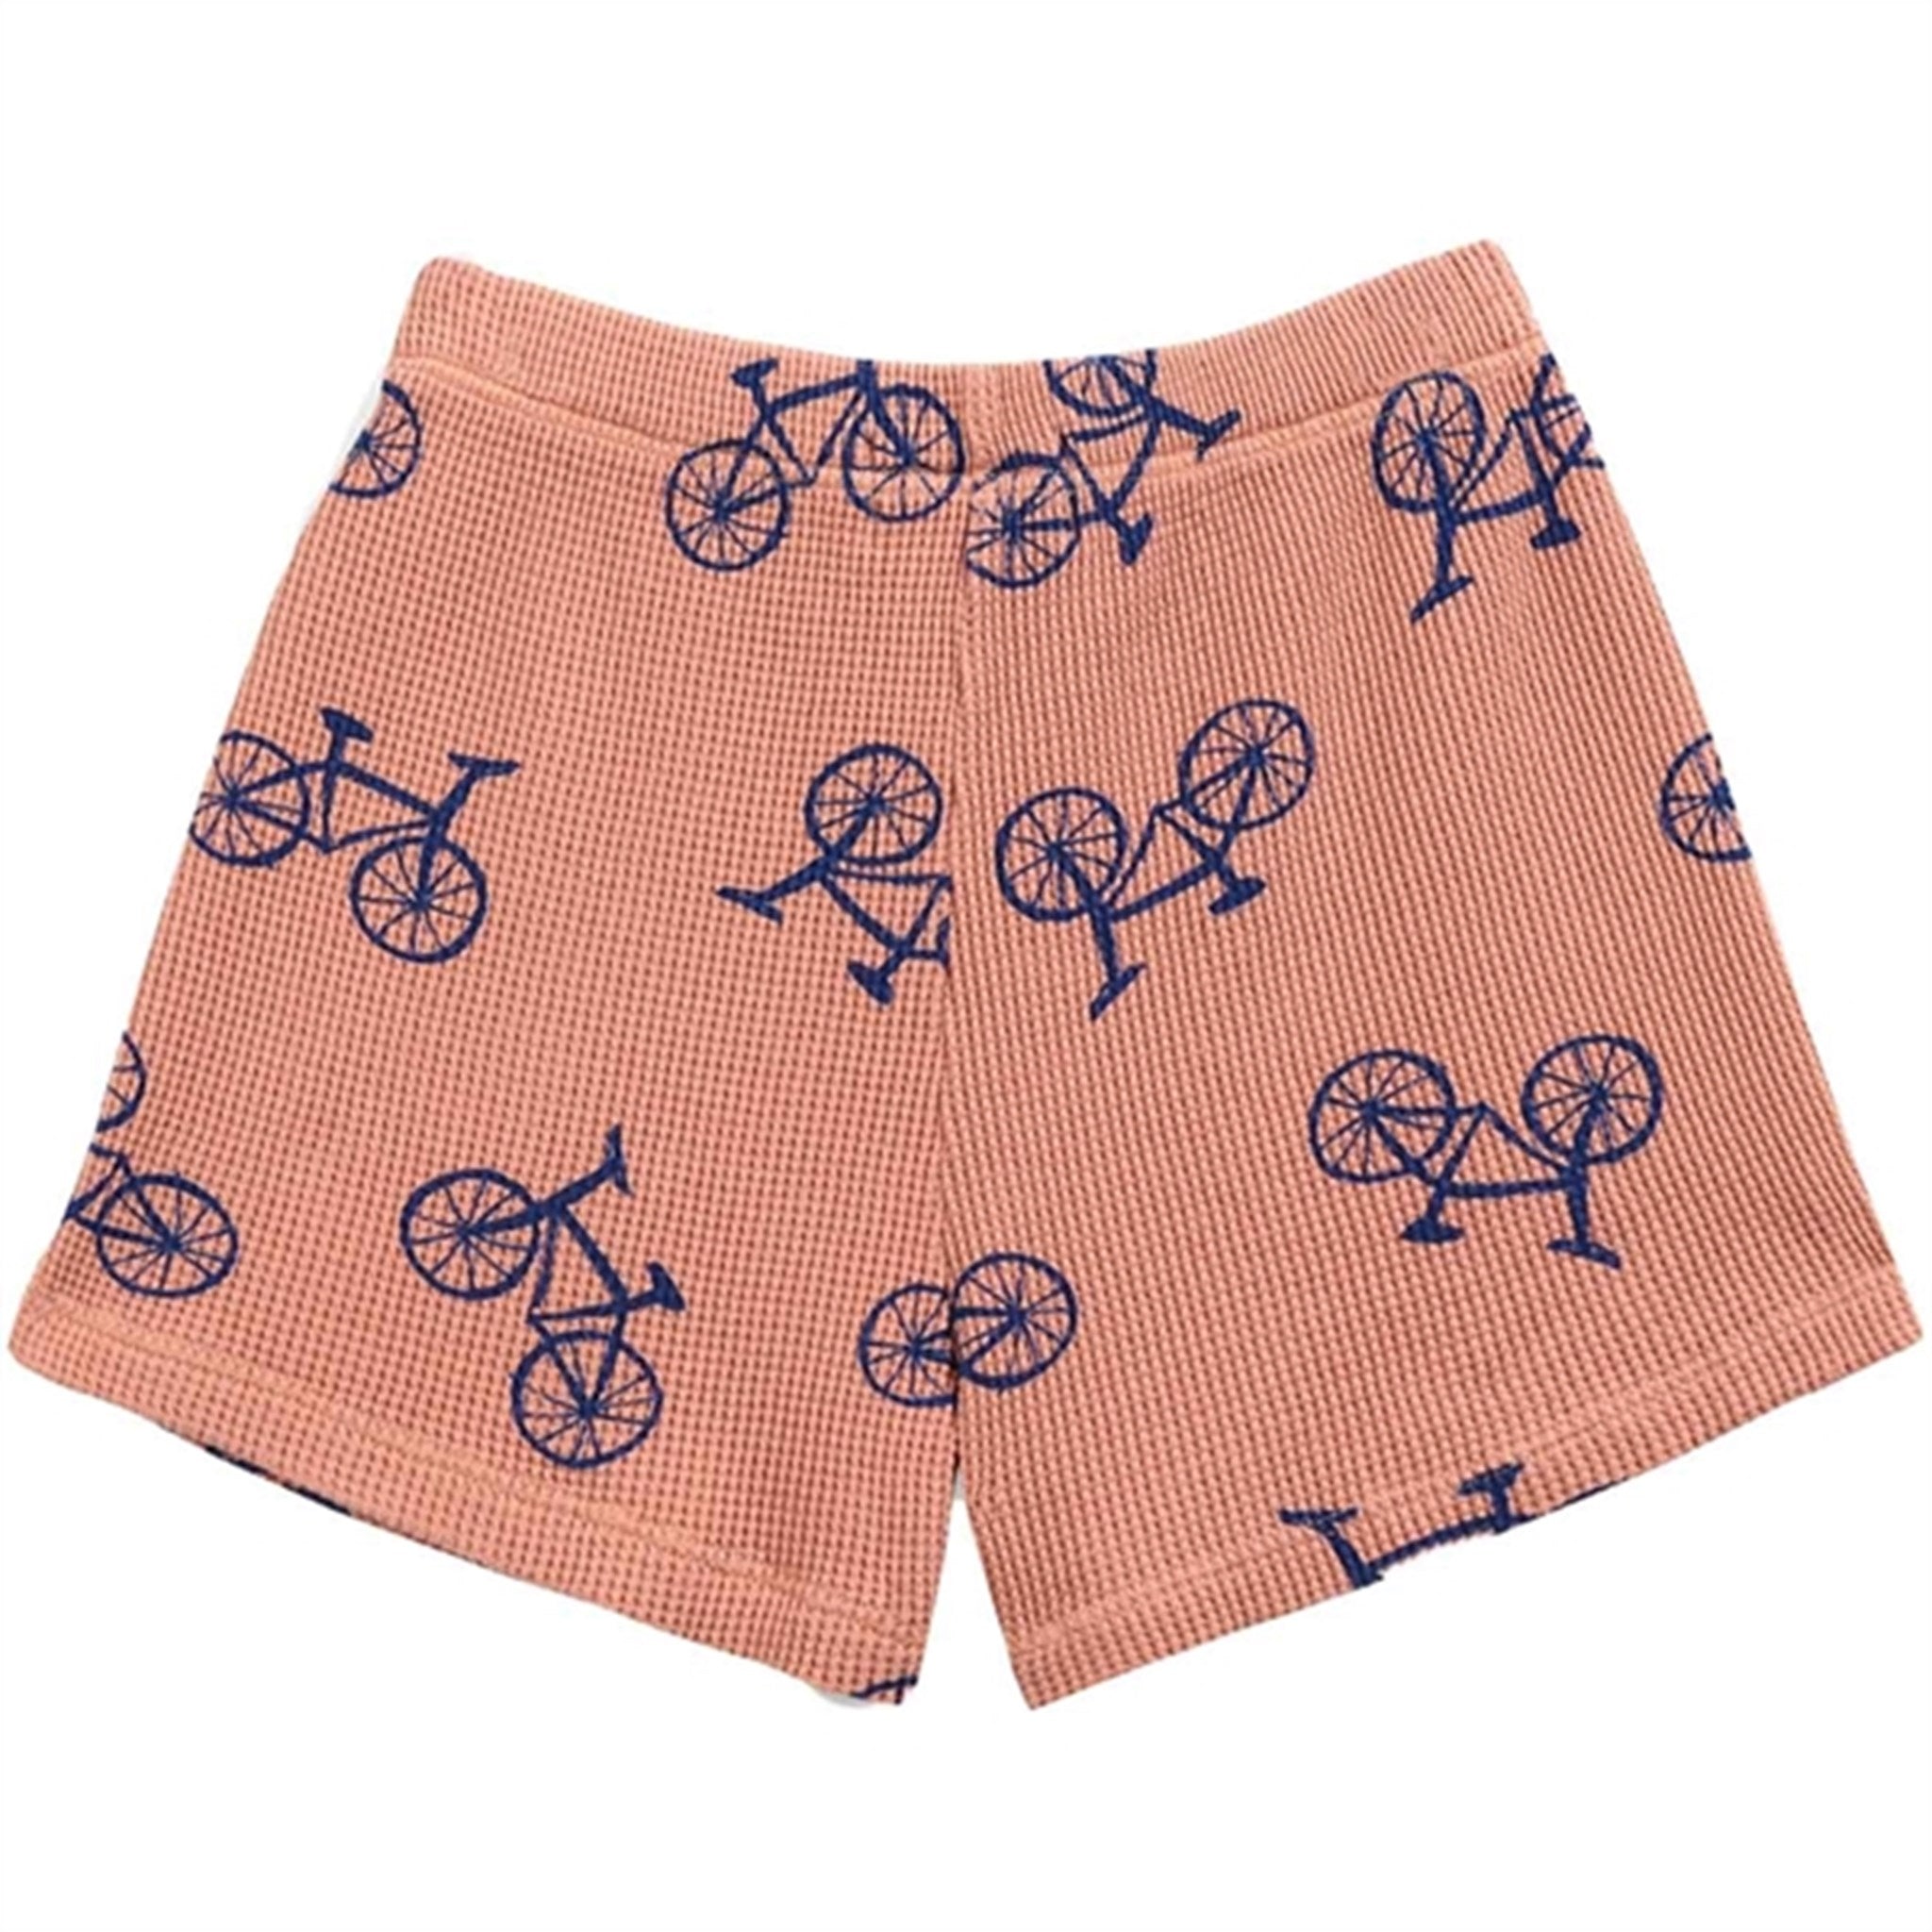 Bobo Choses Bicycle All Over Shorts 2